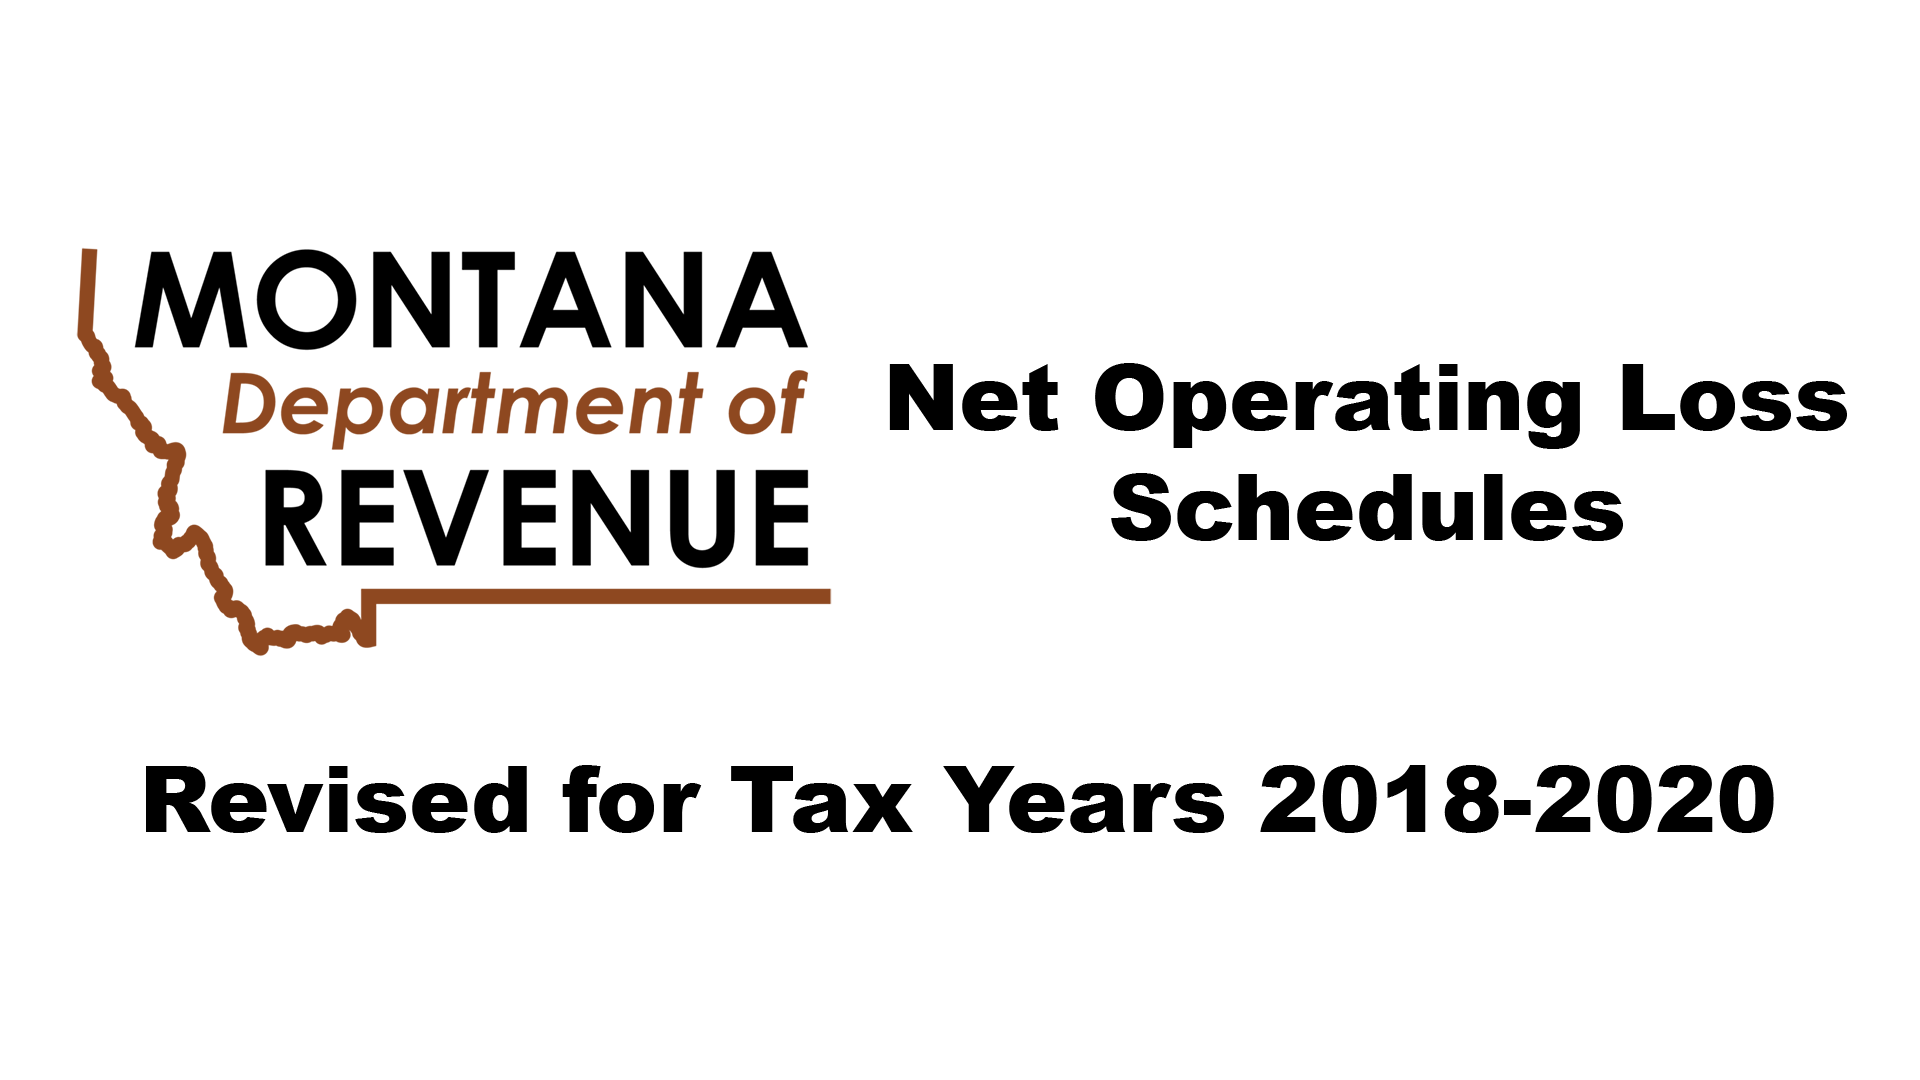 Revised Montana NOL Schedule for Tax Years 2018-2020